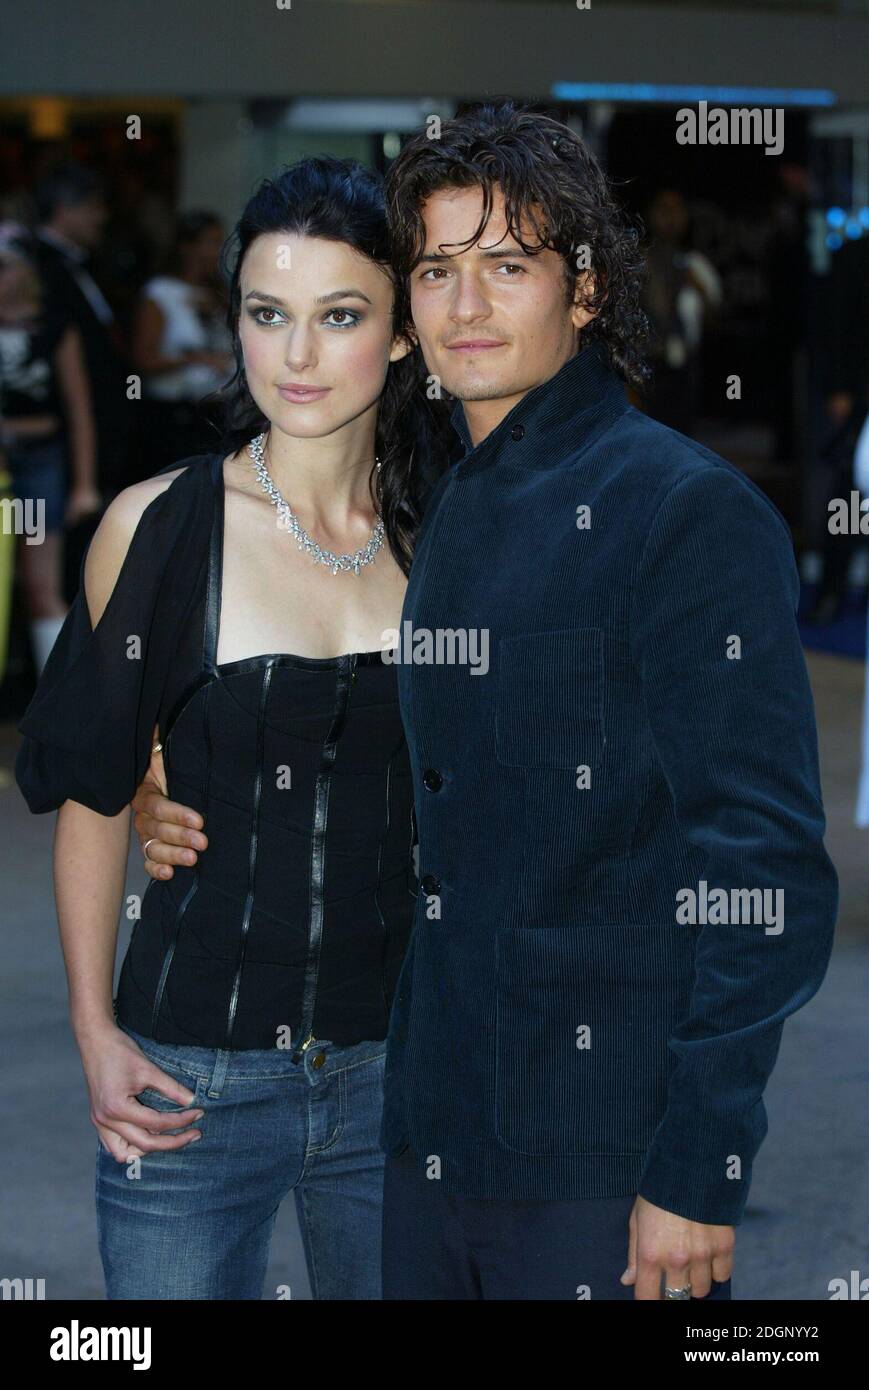 Orlando keira bloom and dating knightley Why weren't